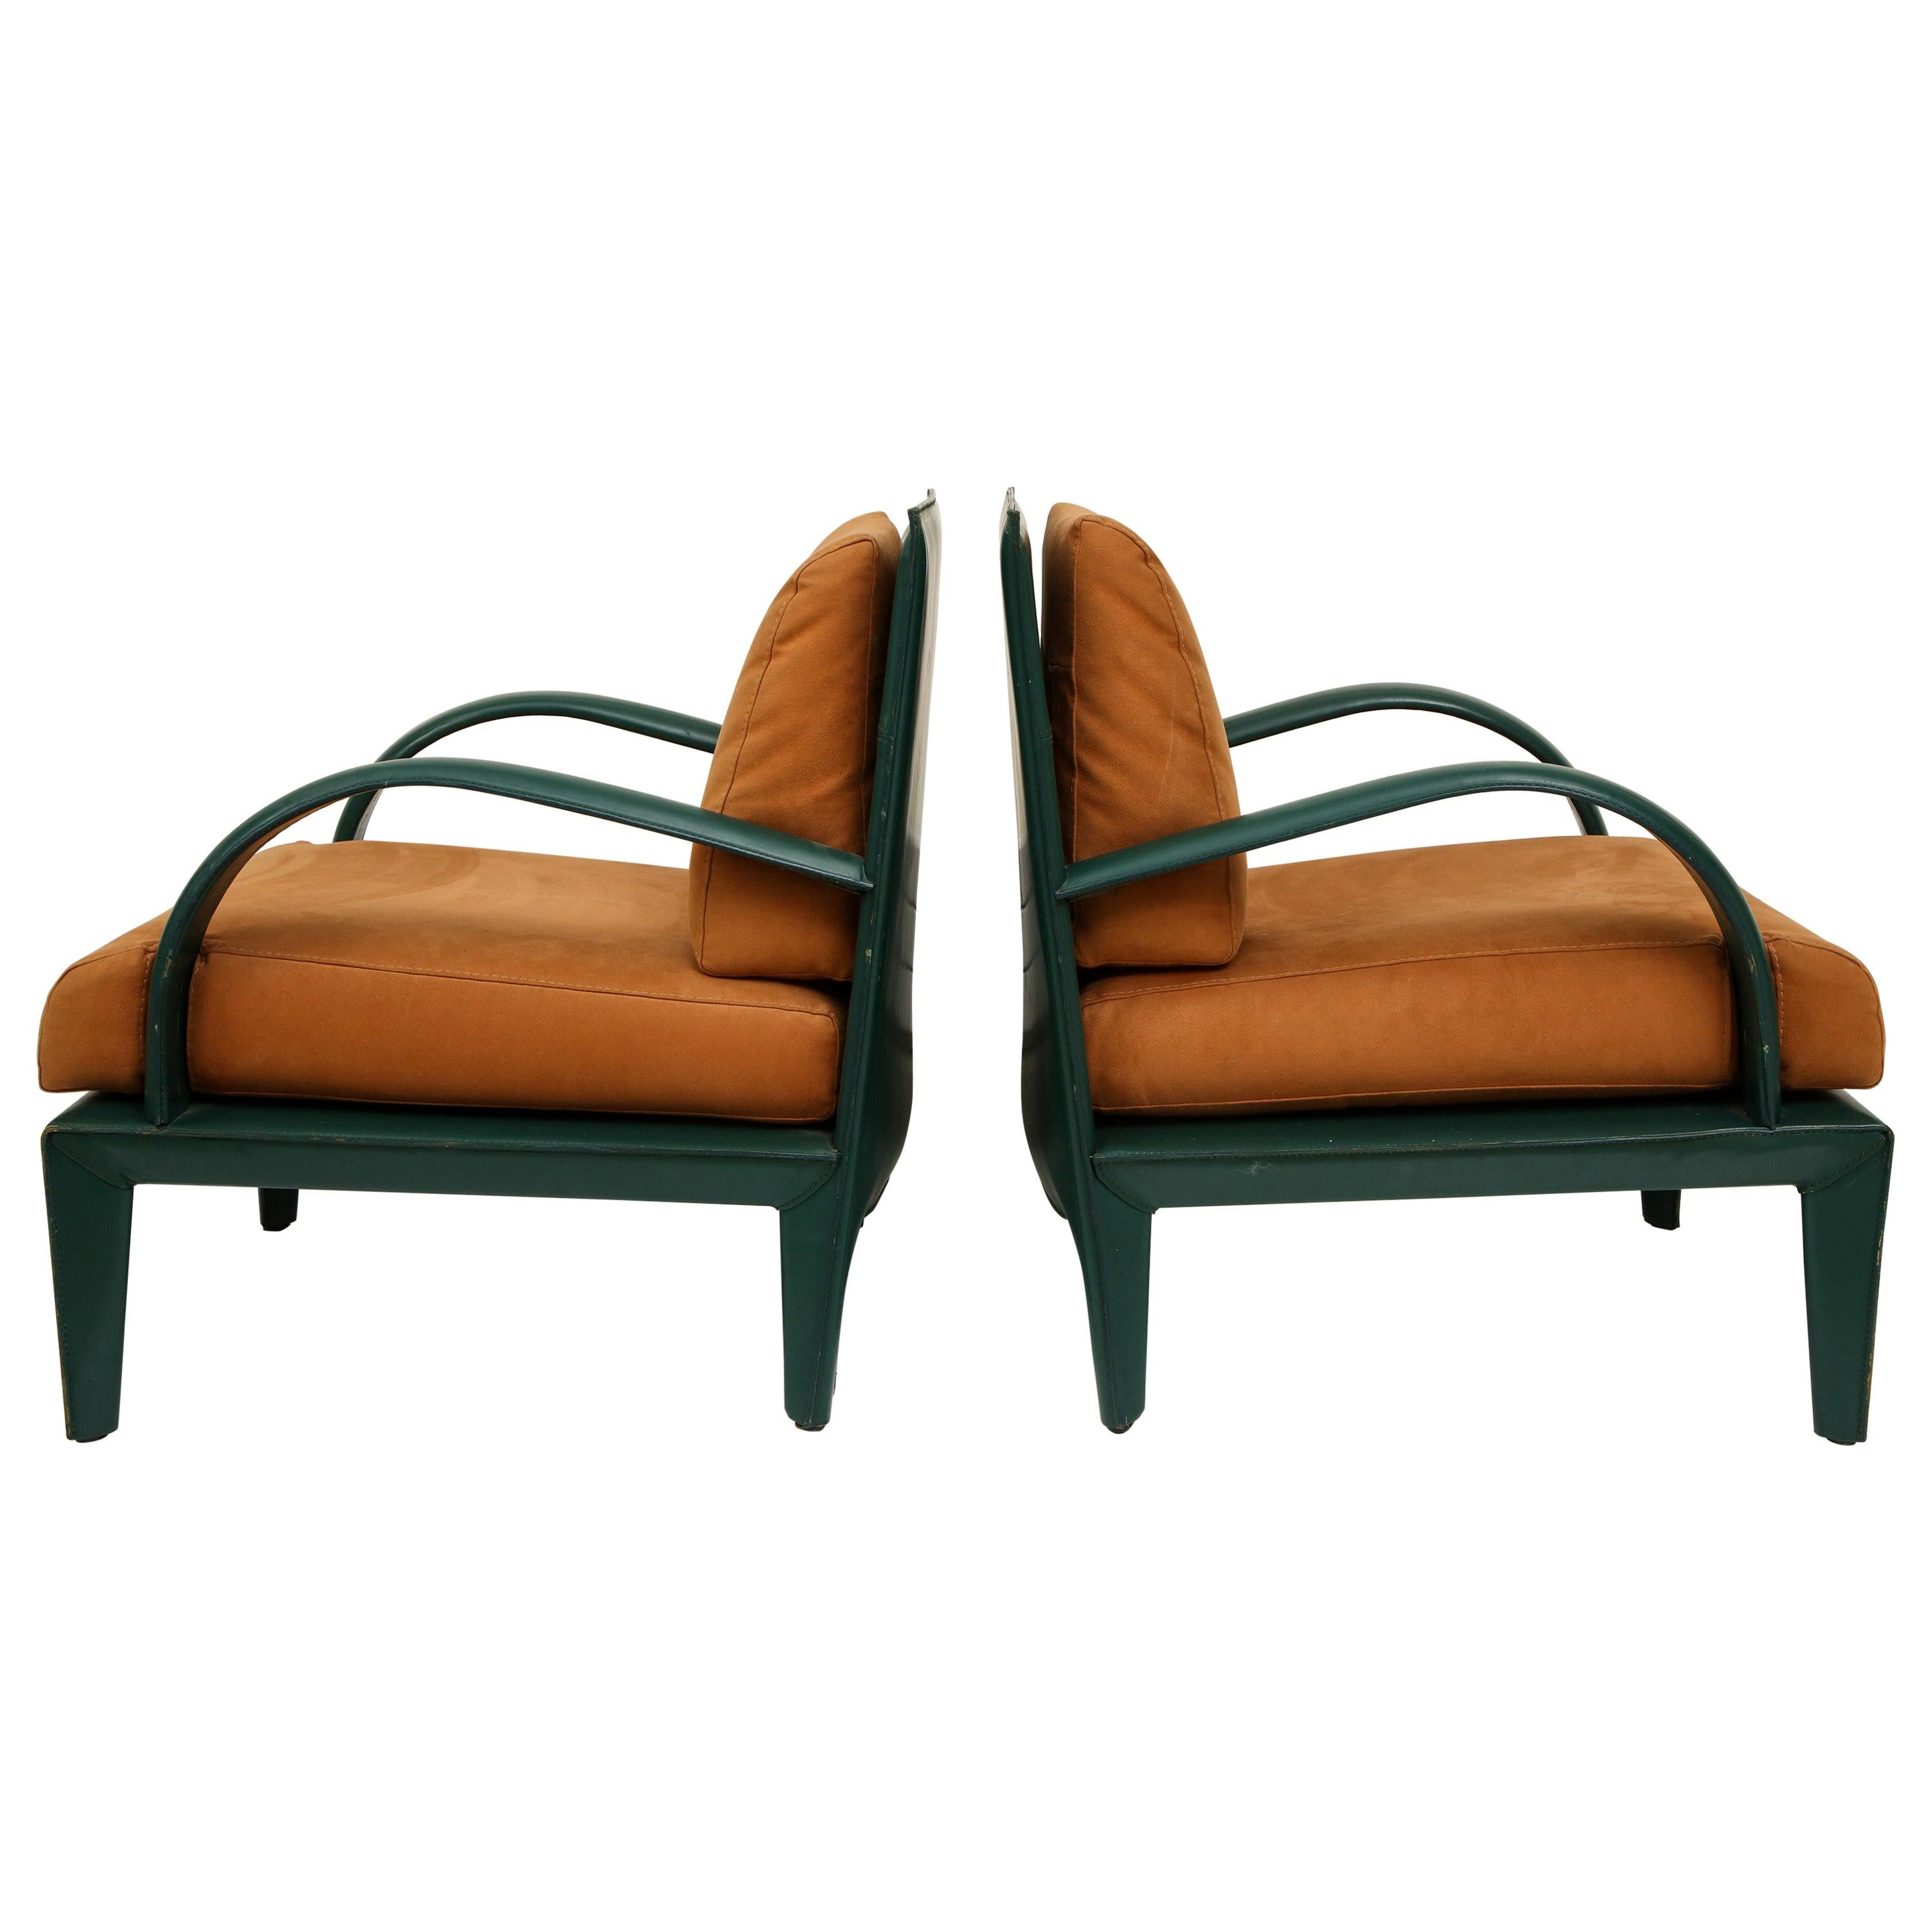 Roche Bobois vintage brown green leather lounge chairs, 1980s, France

Beautiful and heavy 1980s lounge chairs. The green leather is in very good condition and sturdy throughout. The brown ultra suede is a perfect contrast. Very